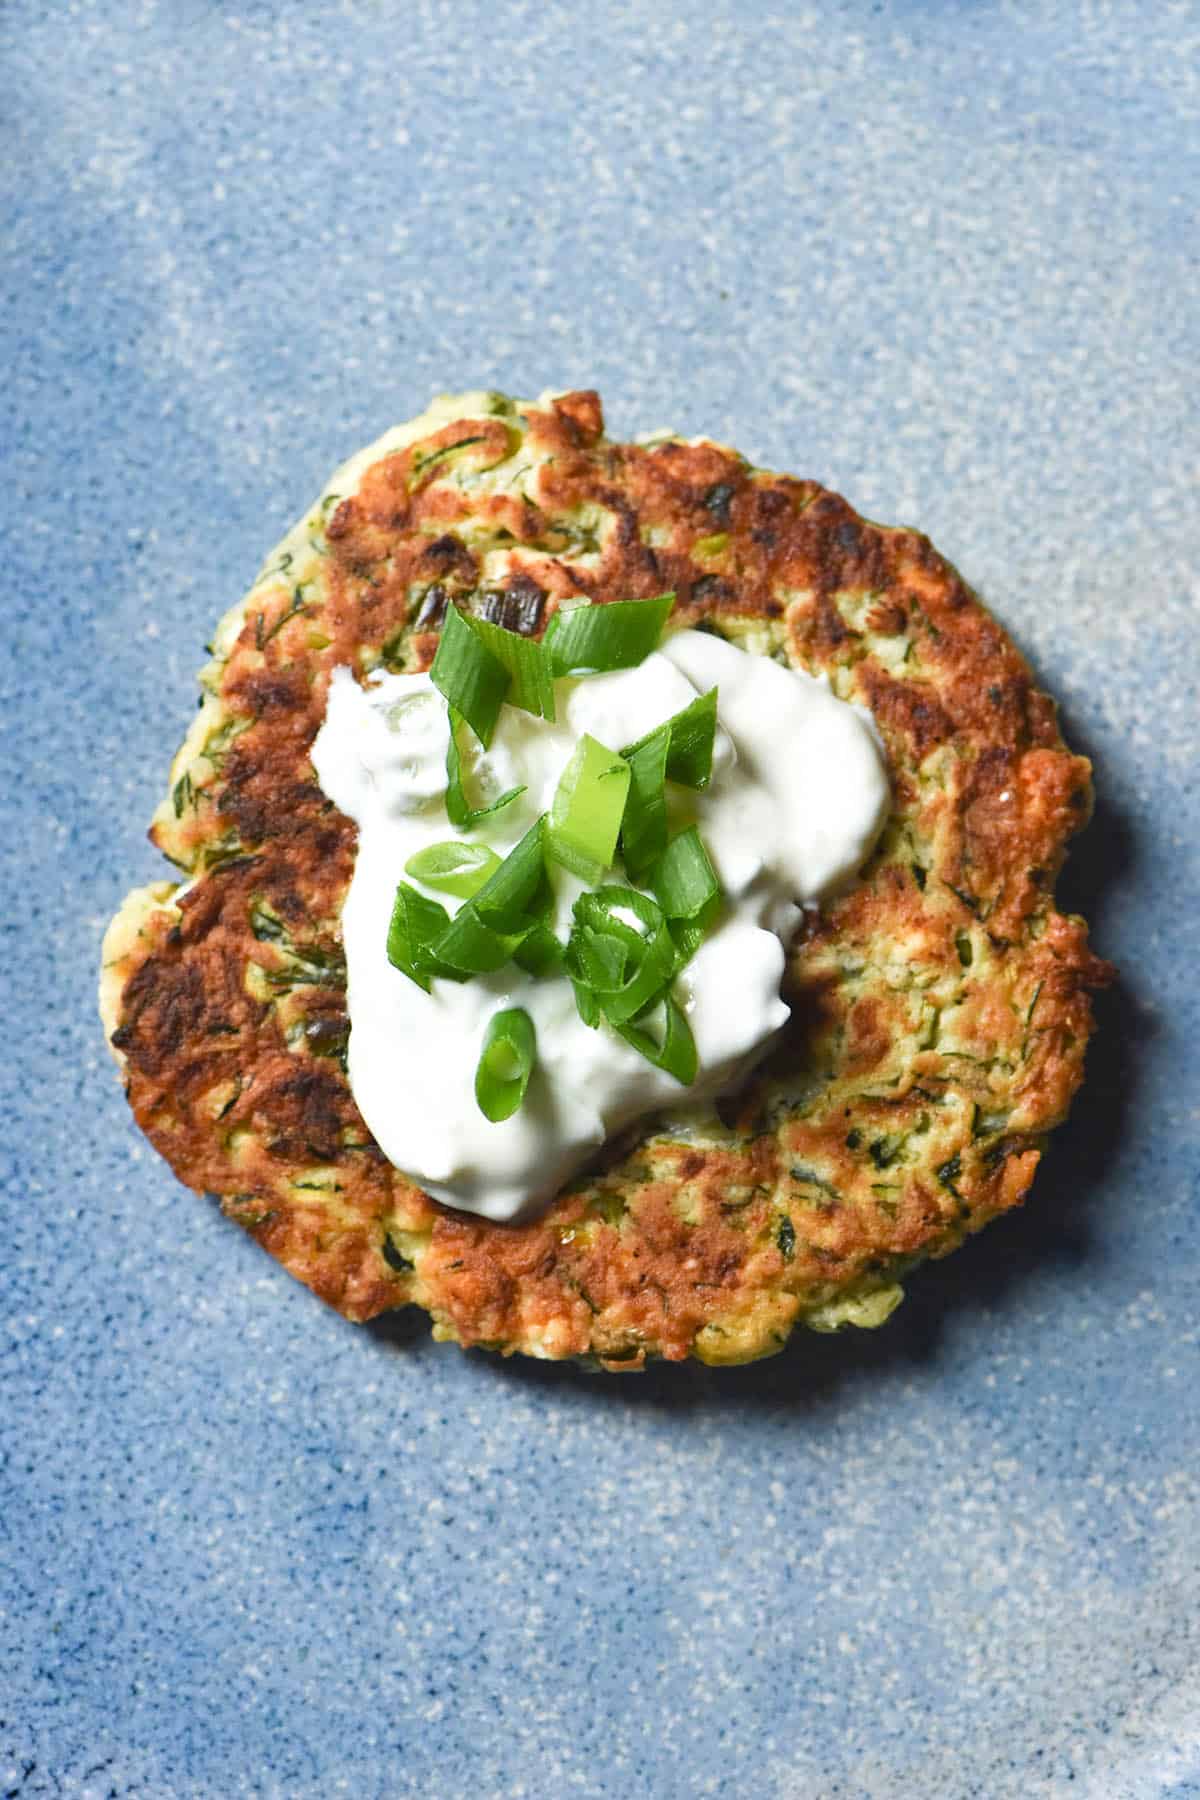 An aerial view of a gluten free zucchini fritter topped with a dollop of yoghurt and spring onion greens atop a bright blue ceramic plate